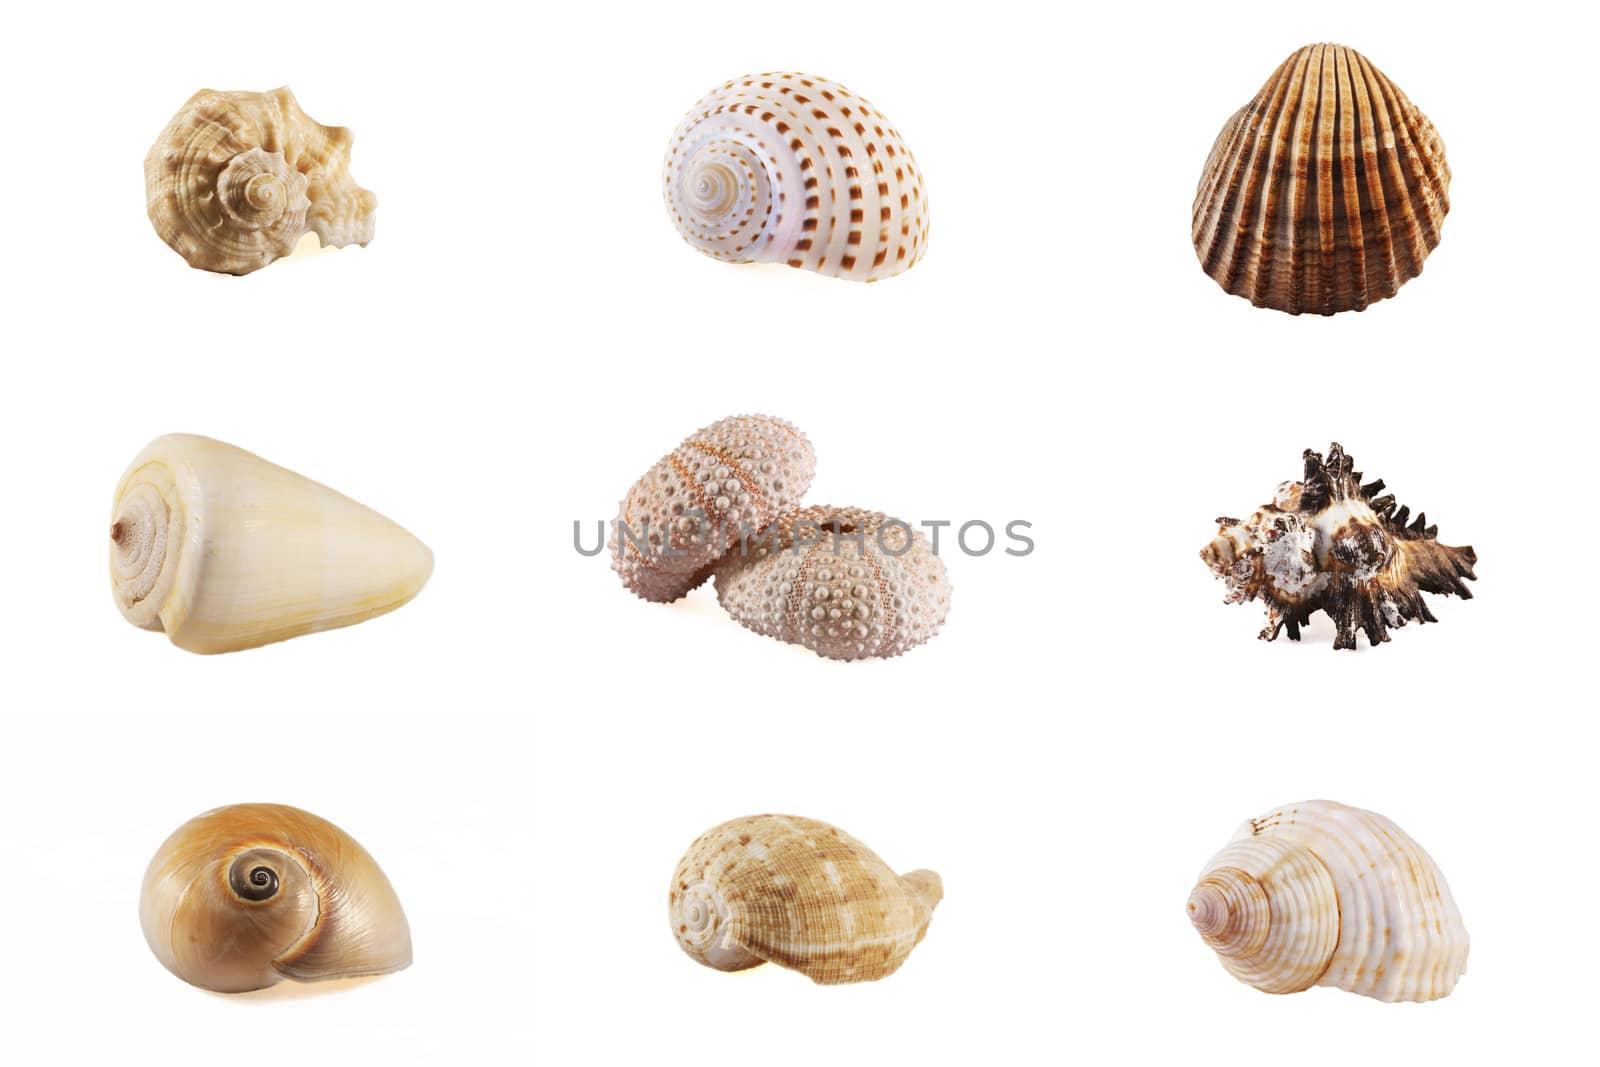 Seashell mosaic collection by HERRAEZ